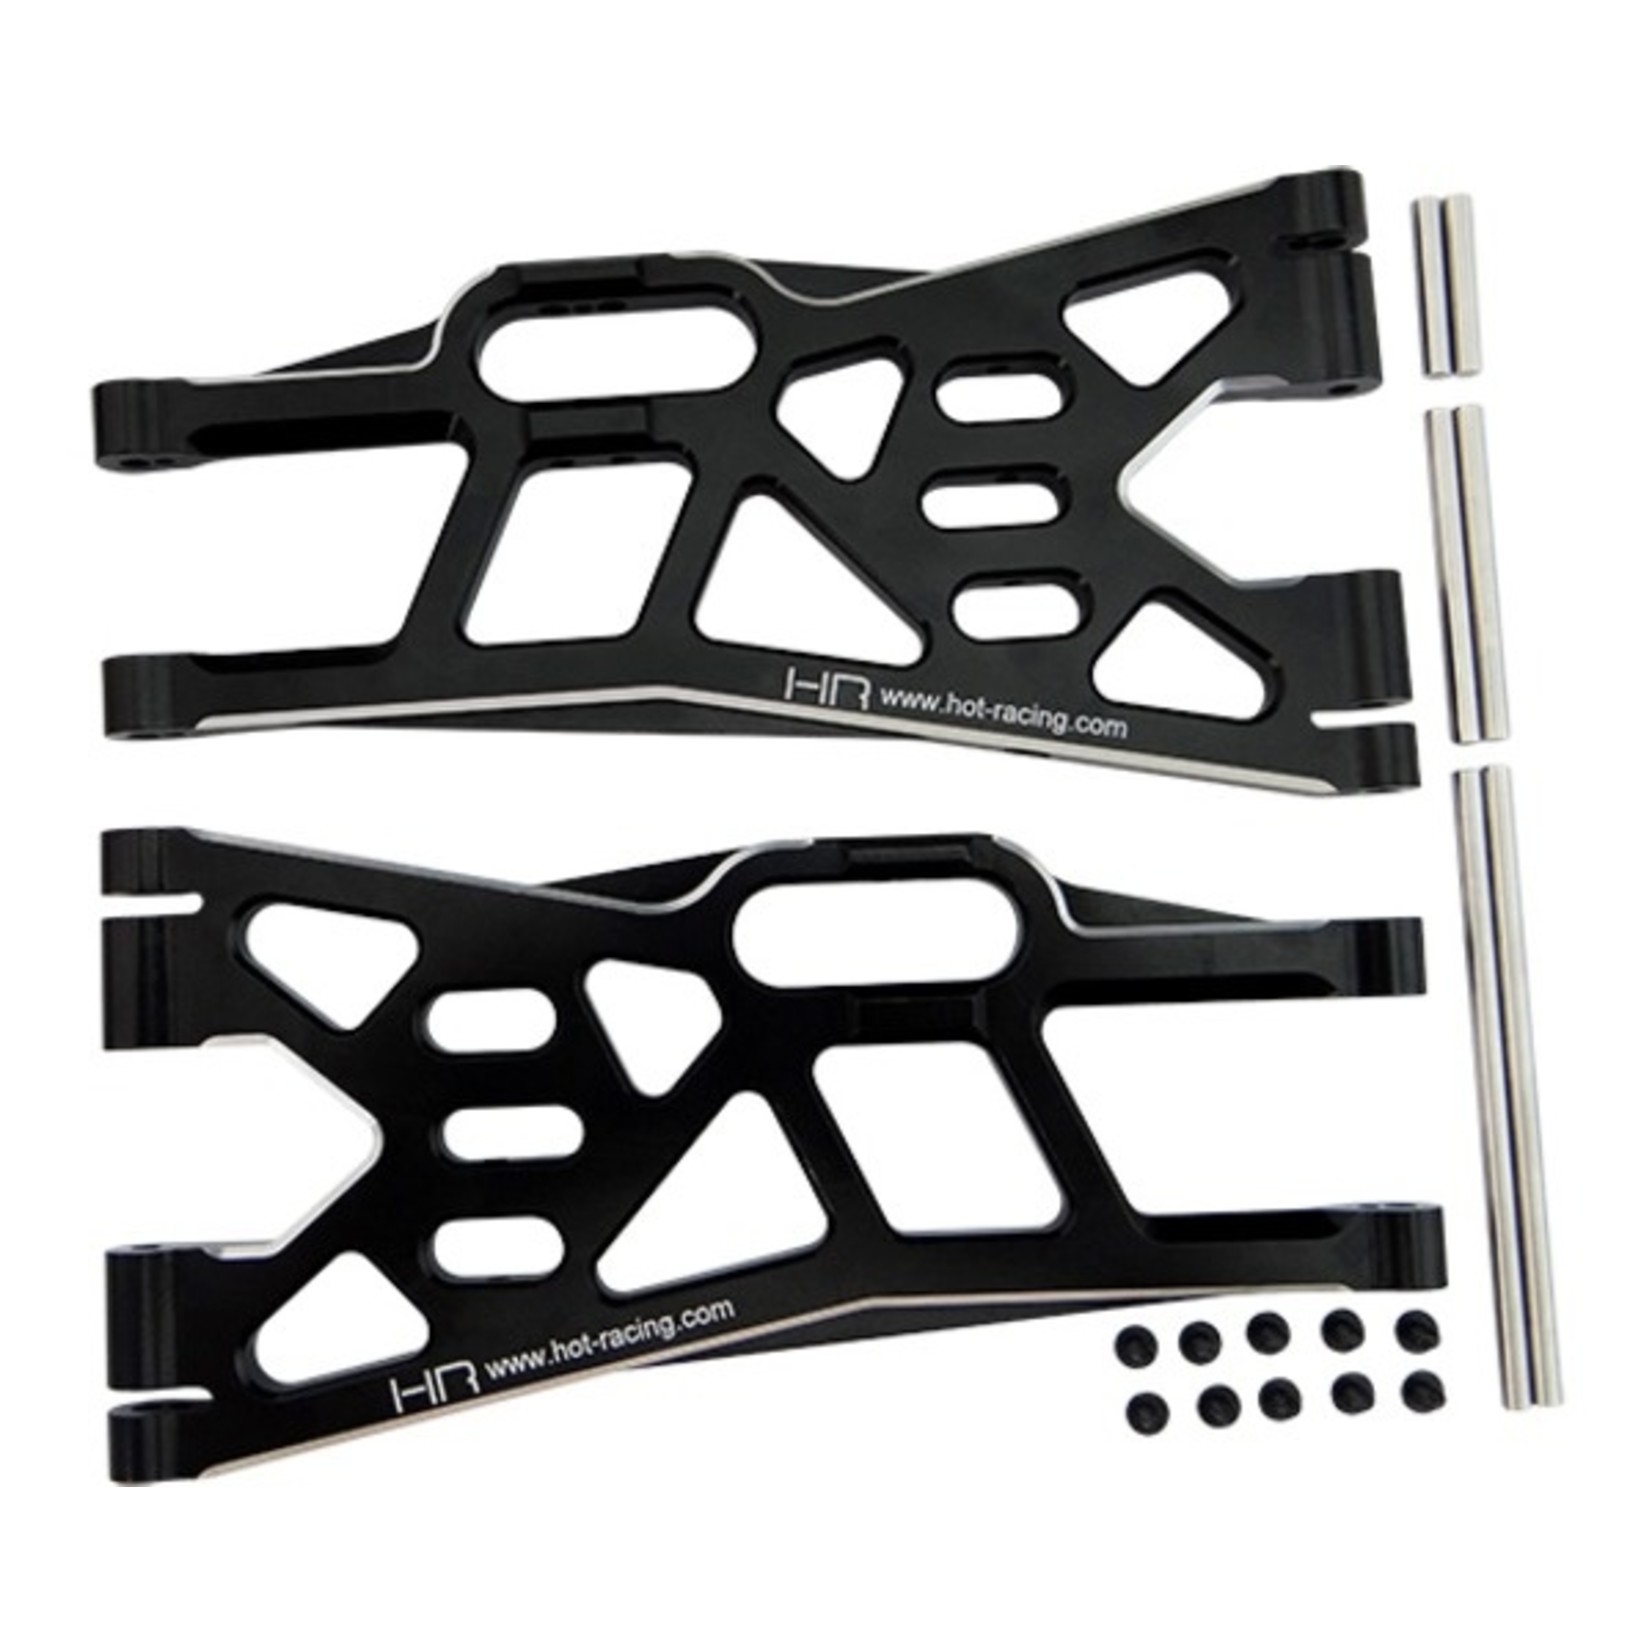 Hot Racing HRAXMX55X01 - Aluminum Front Lower Arm Set Black, for Traxxas X-Maxx